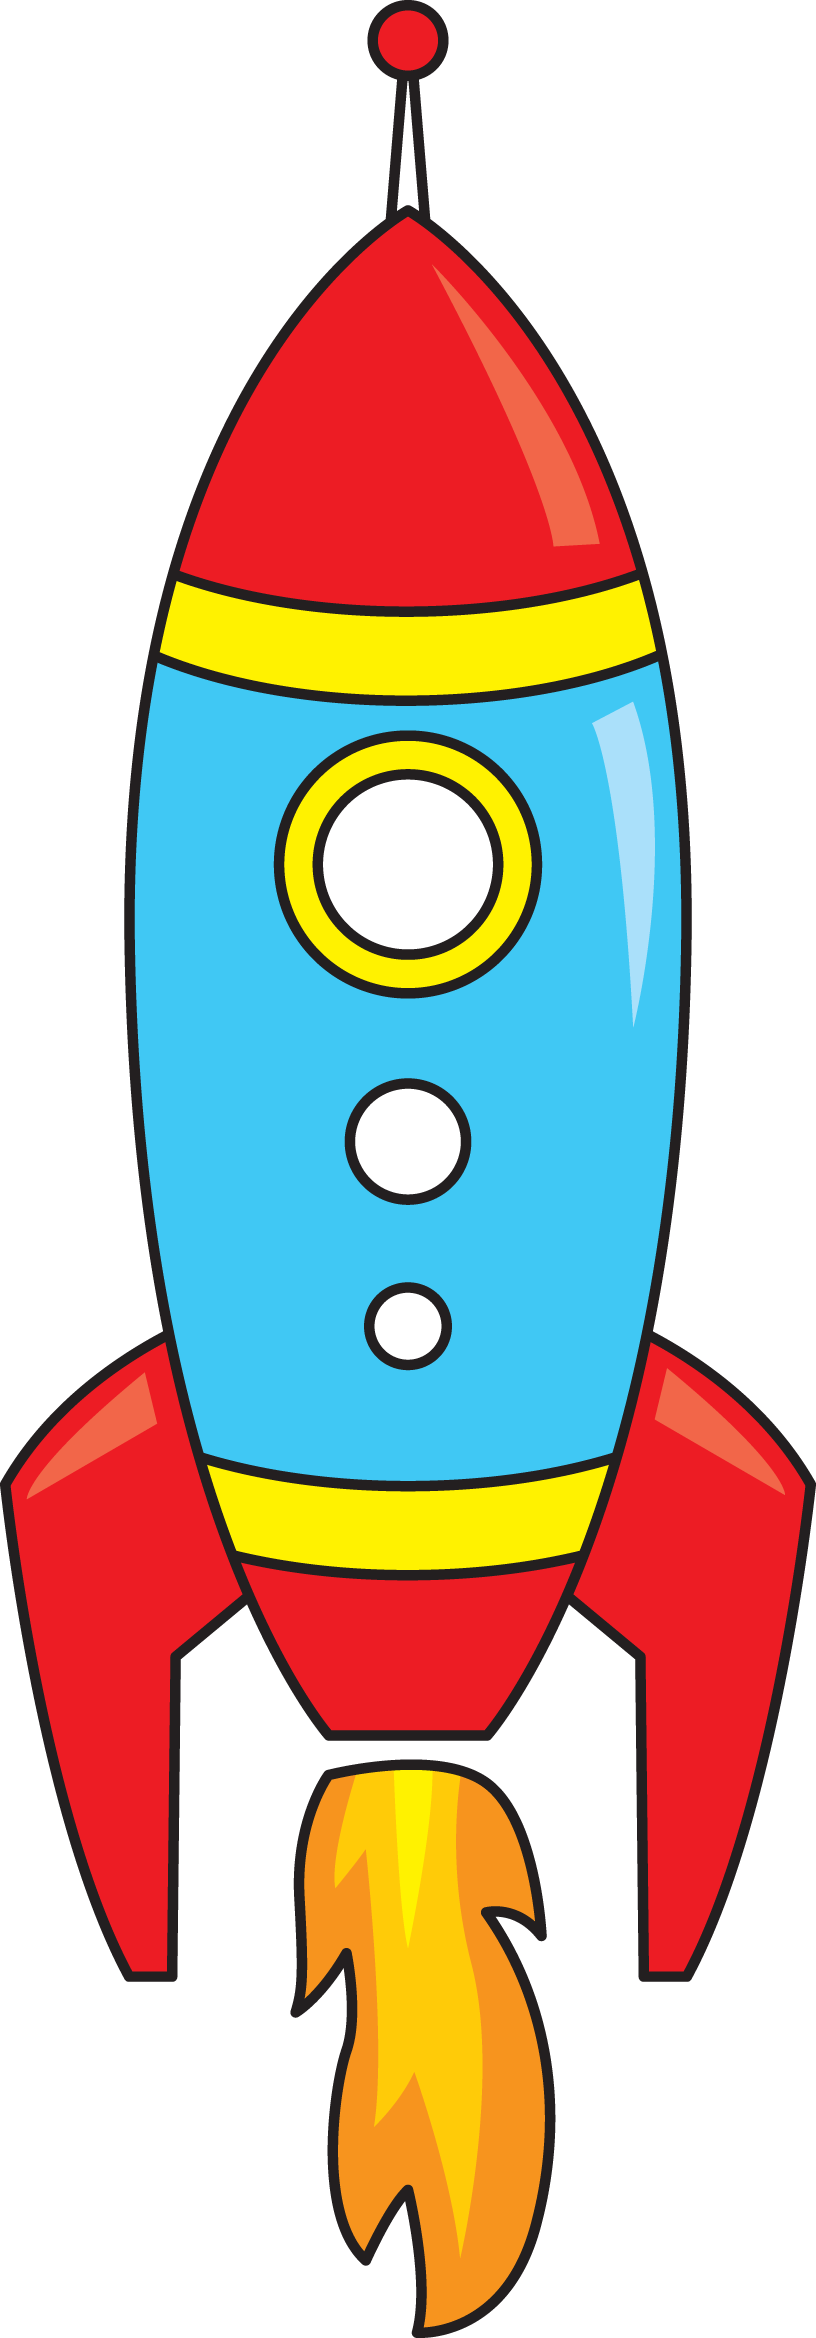 Rocket clipart free images 5